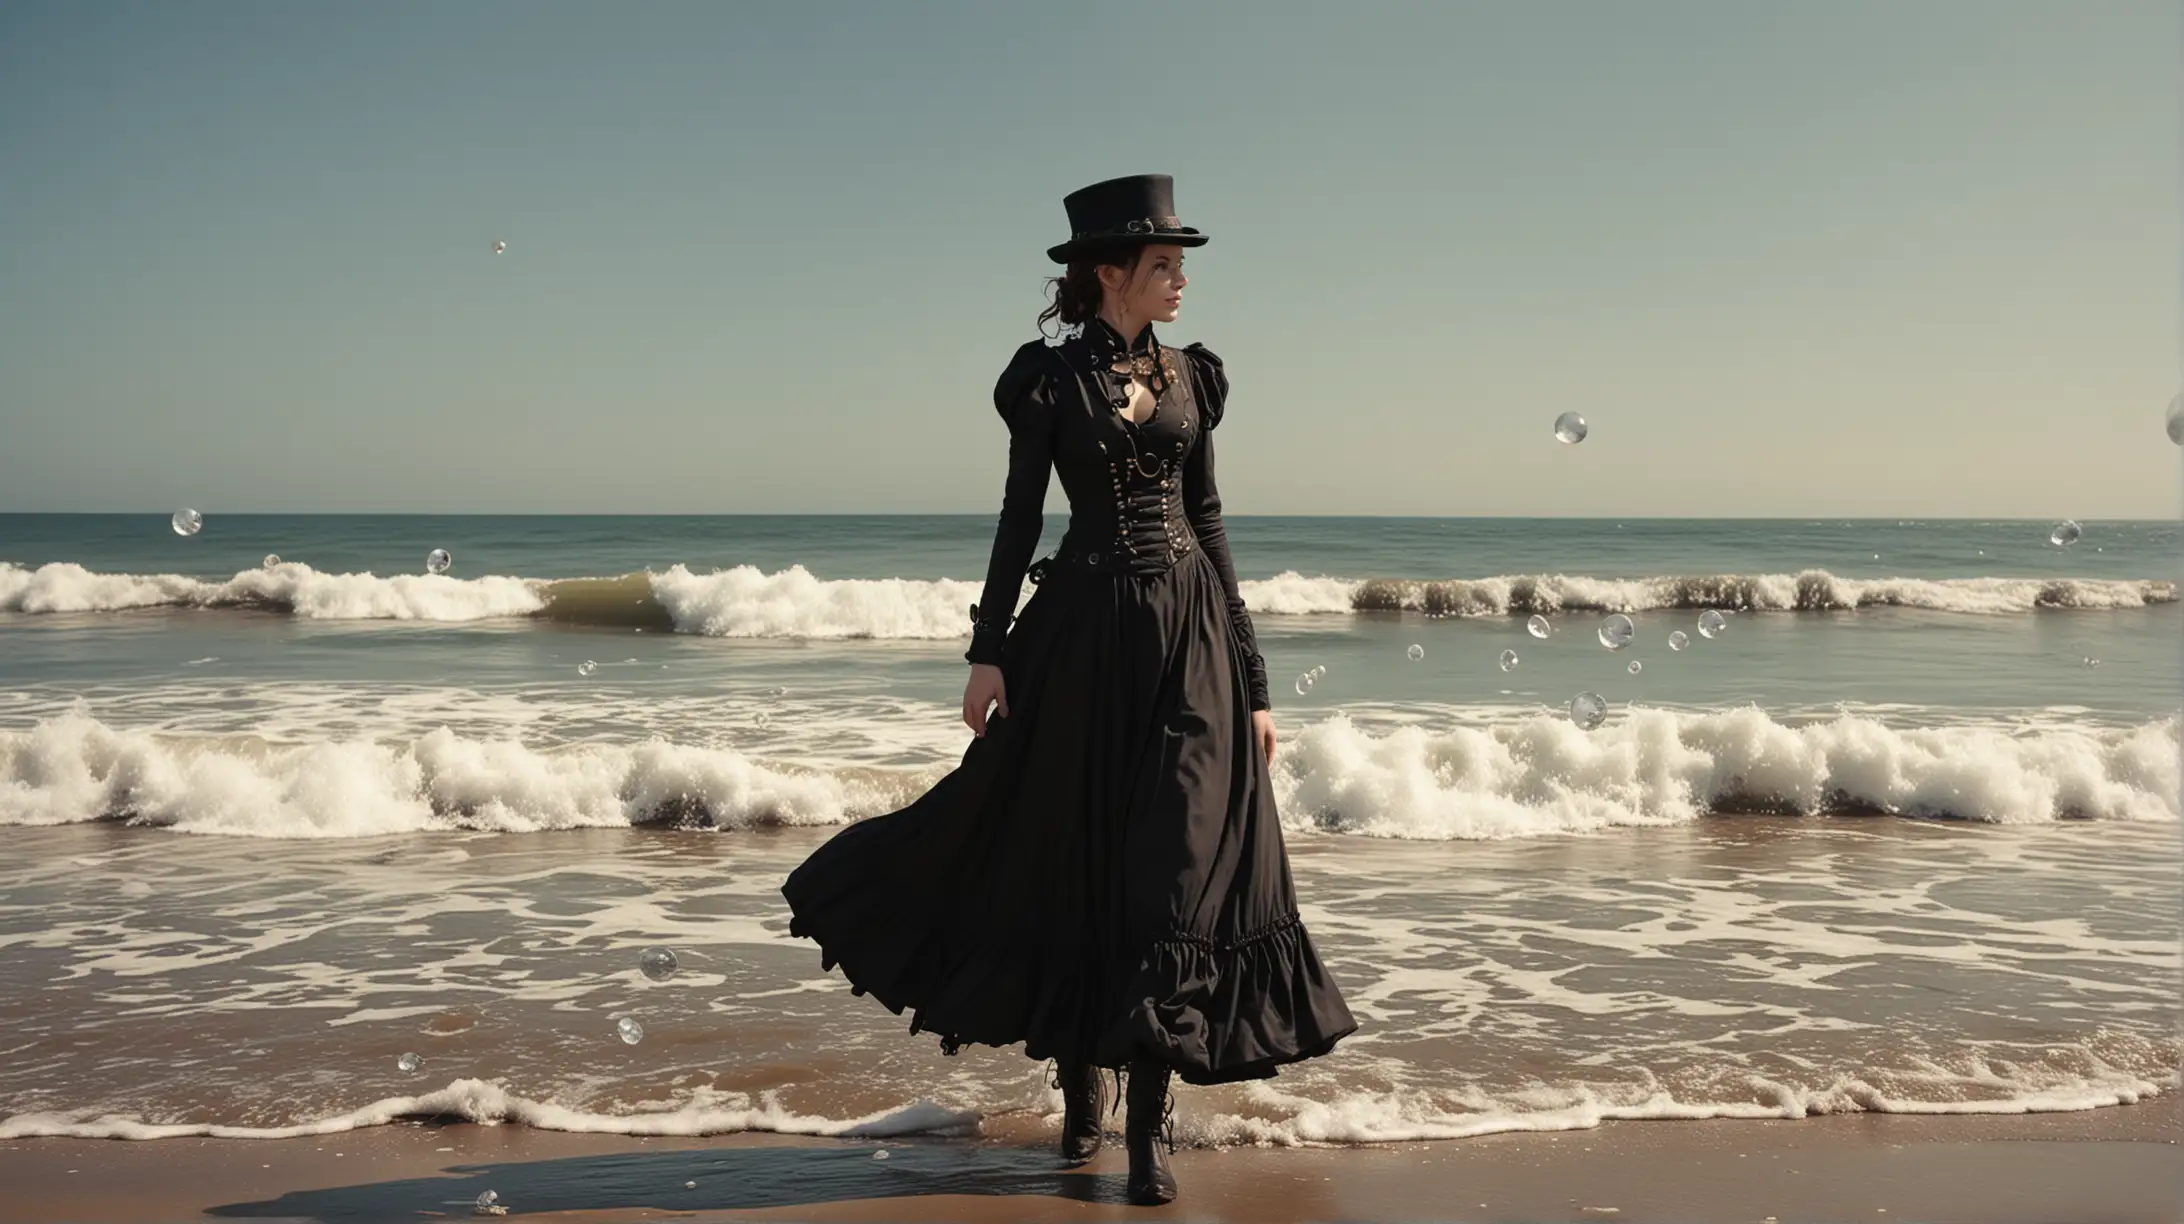 Lonely Steampunk Woman Strolling by the Seashore under Sunny Skies